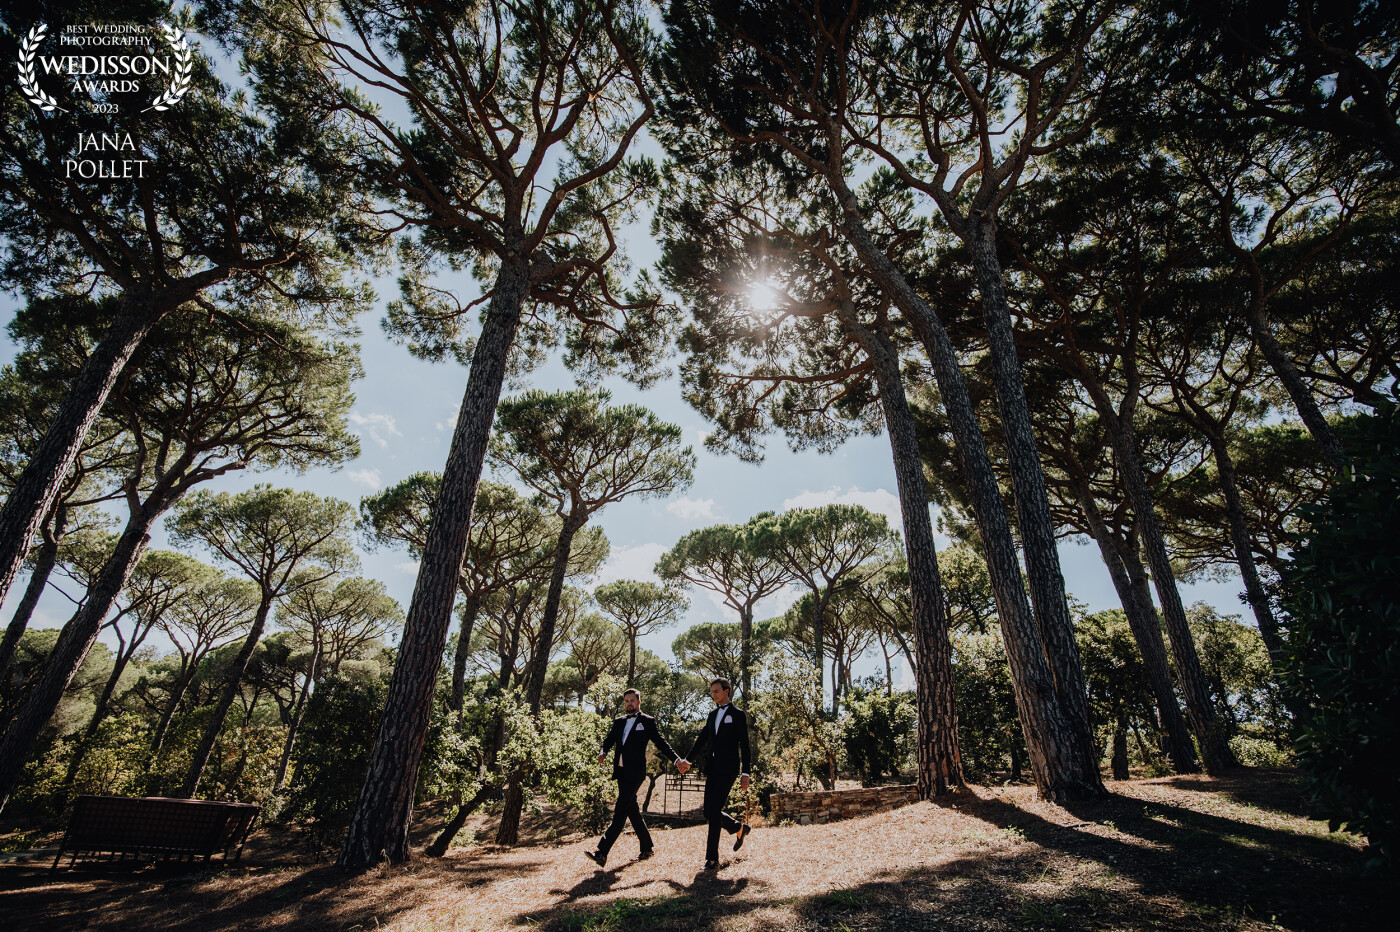 Simon and Matthias are a fantastic couple, their wedding weekend in Saint-Tropez was perfect in every detail. We took their couple photos both downtown and at their wedding venue. When I took this picture I was impressed by the trees there, I was very happy with the result.